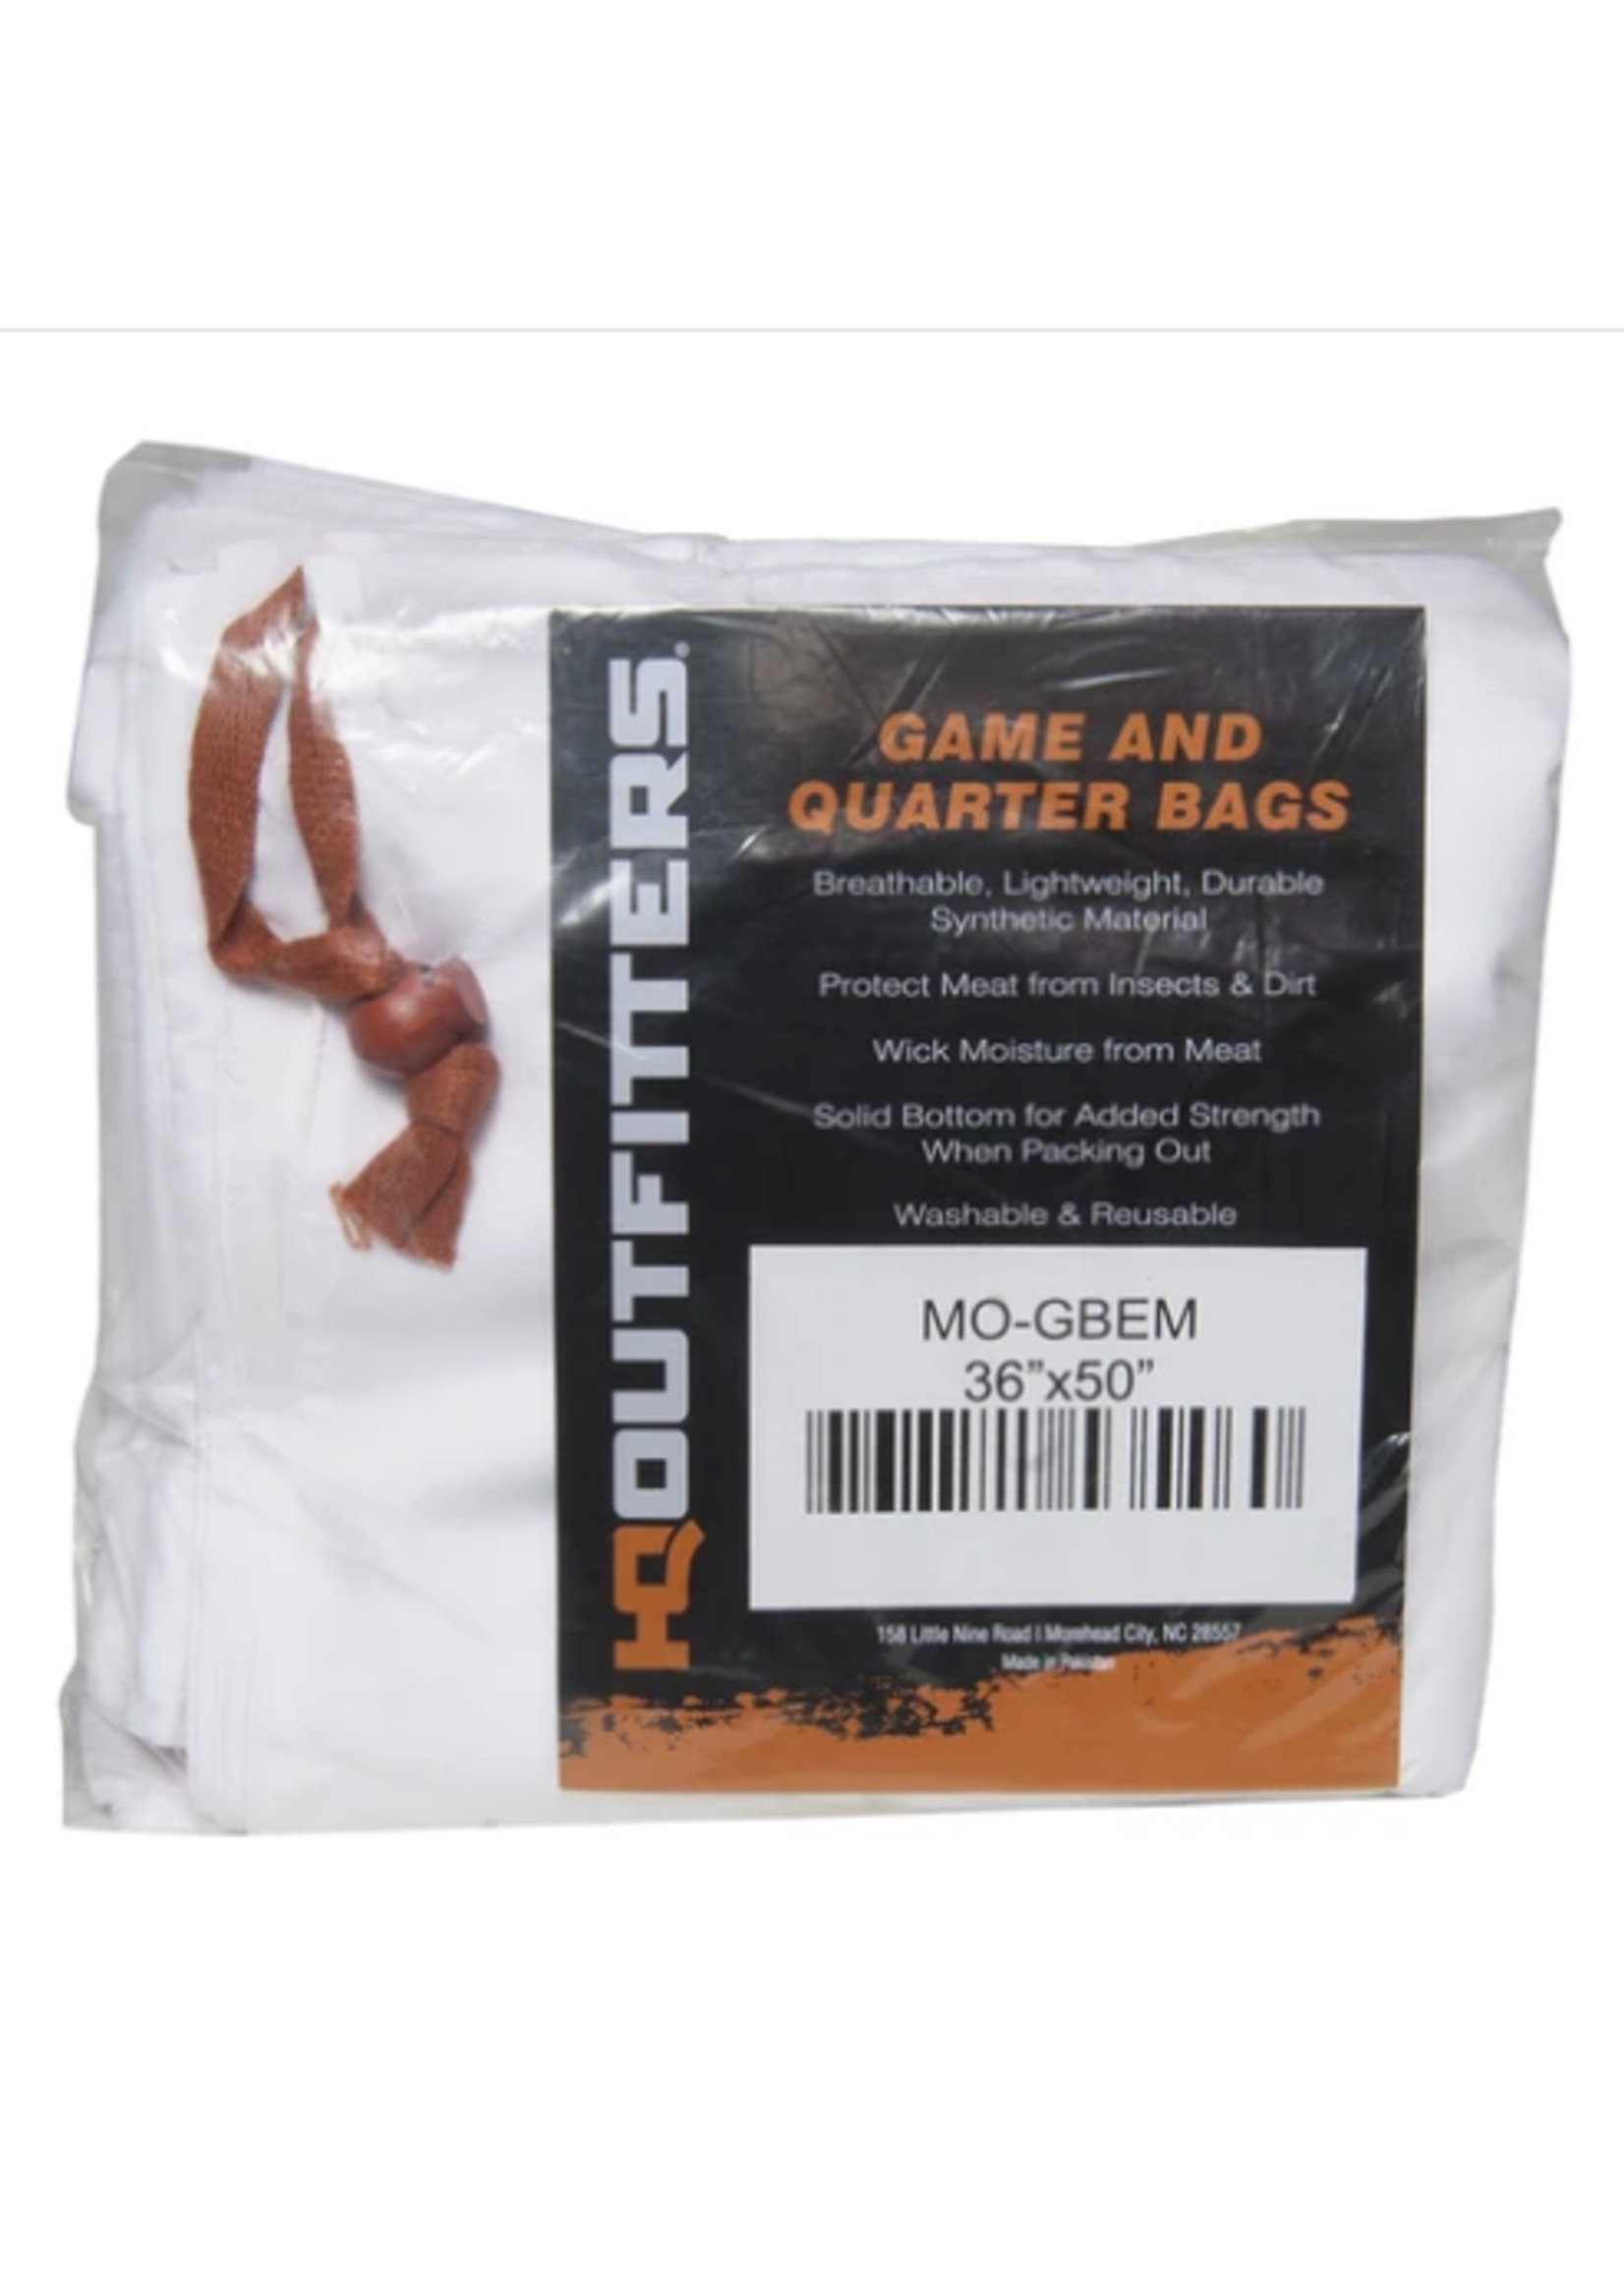 HQ OUTFITTERS HQOUTFITTERS GAME QUATER BAGS 36"X50" 8 BAGS